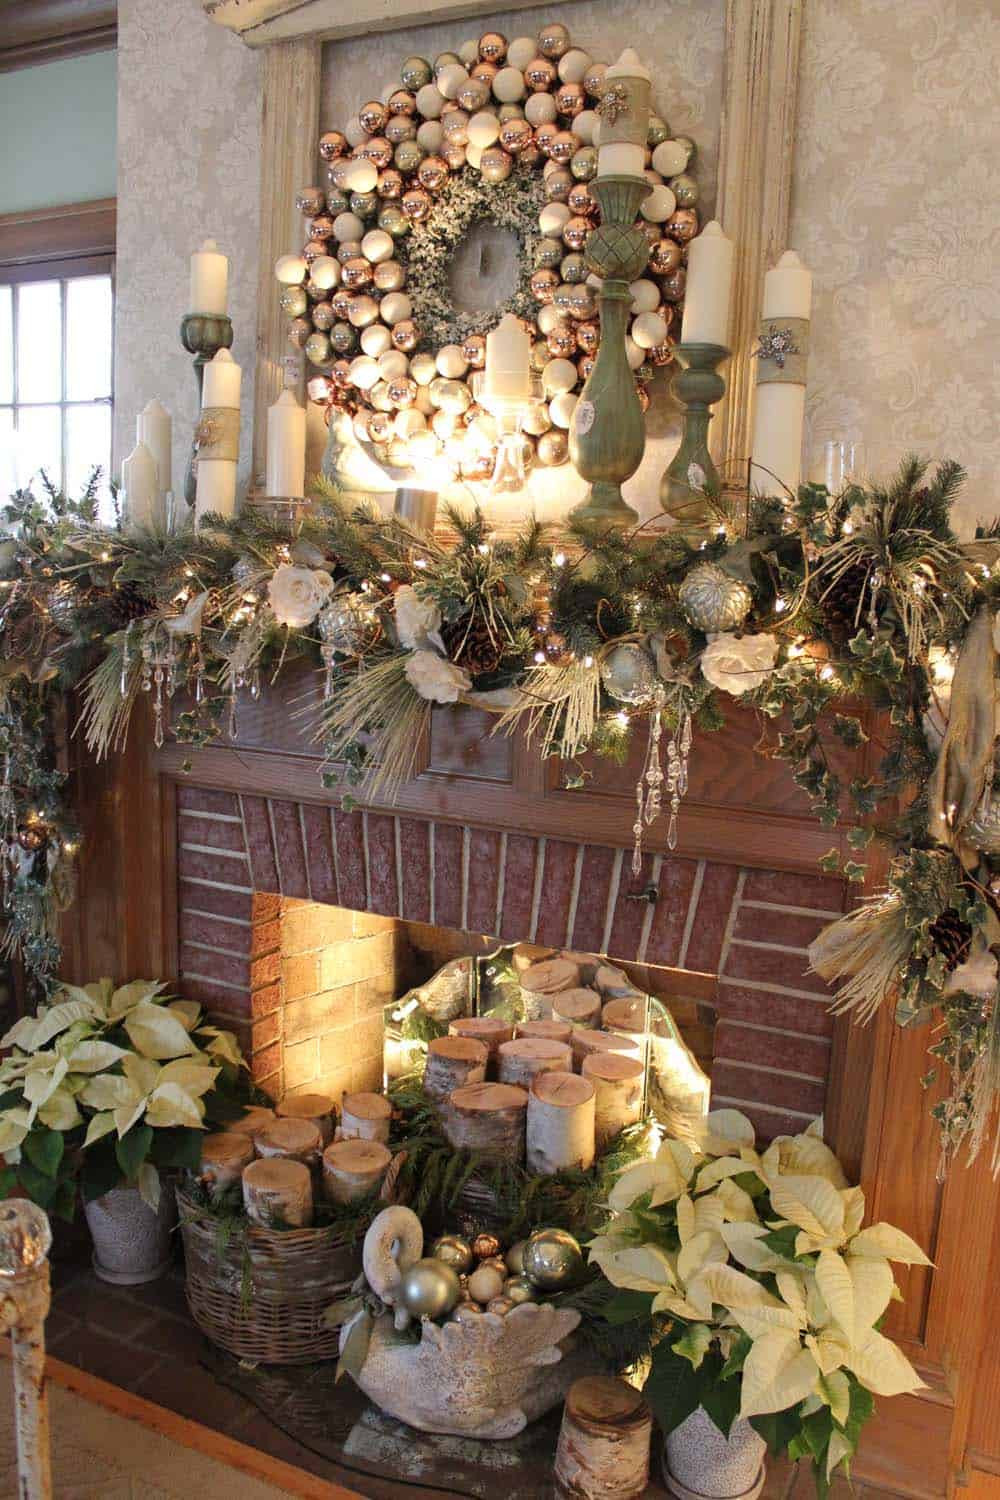 Christmas Fireplace Mantle Decorations
 50 Absolutely fabulous Christmas mantel decorating ideas